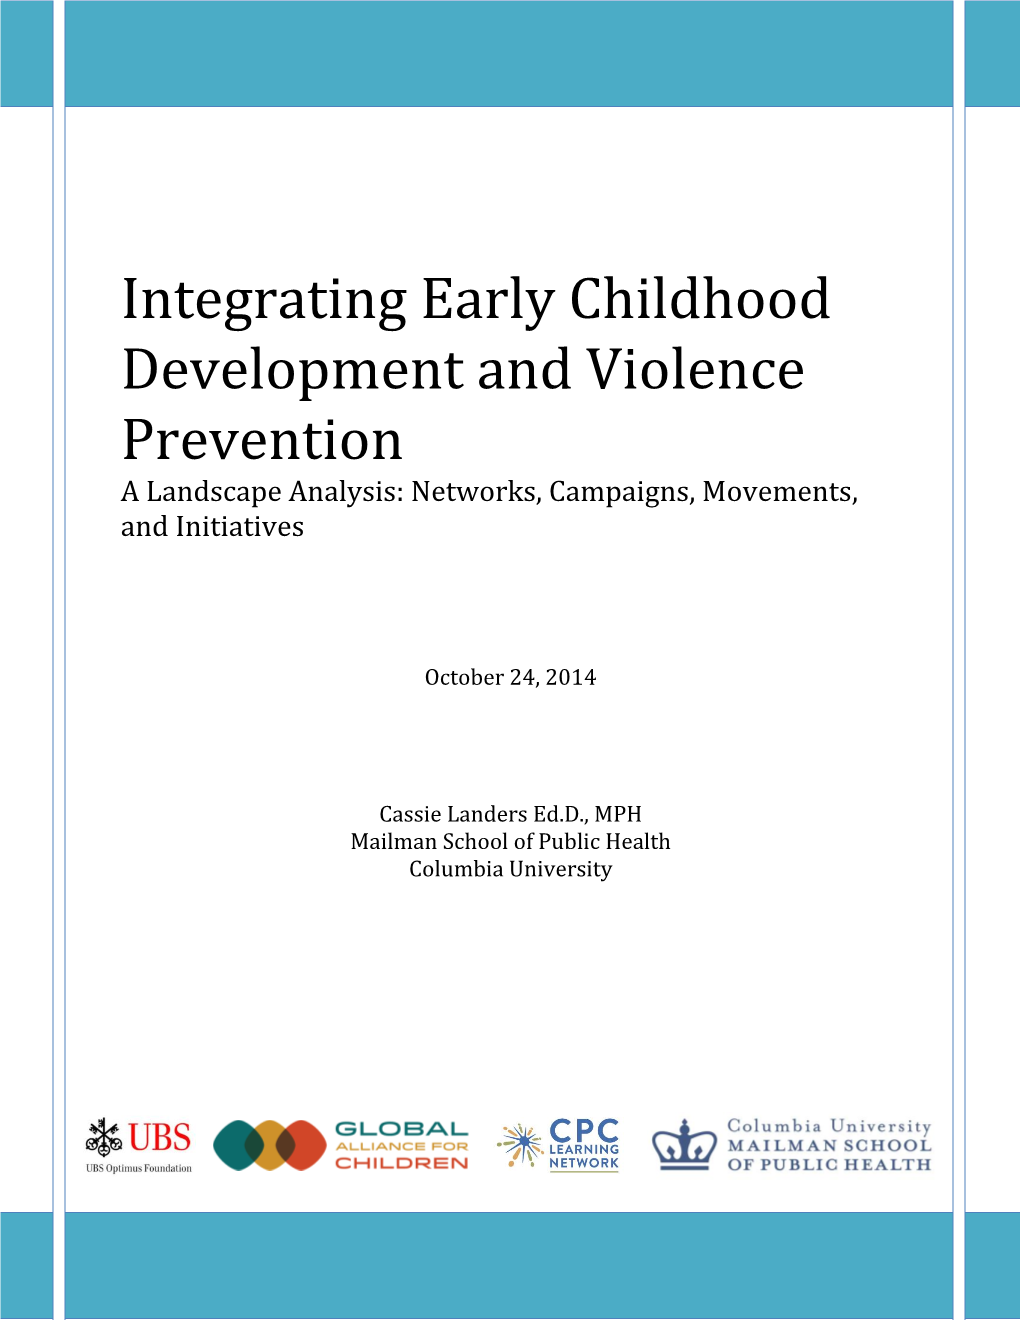 Integrating Early Childhood Development and Violence Prevention a Landscape Analysis: Networks, Campaigns, Movements, and Initiatives